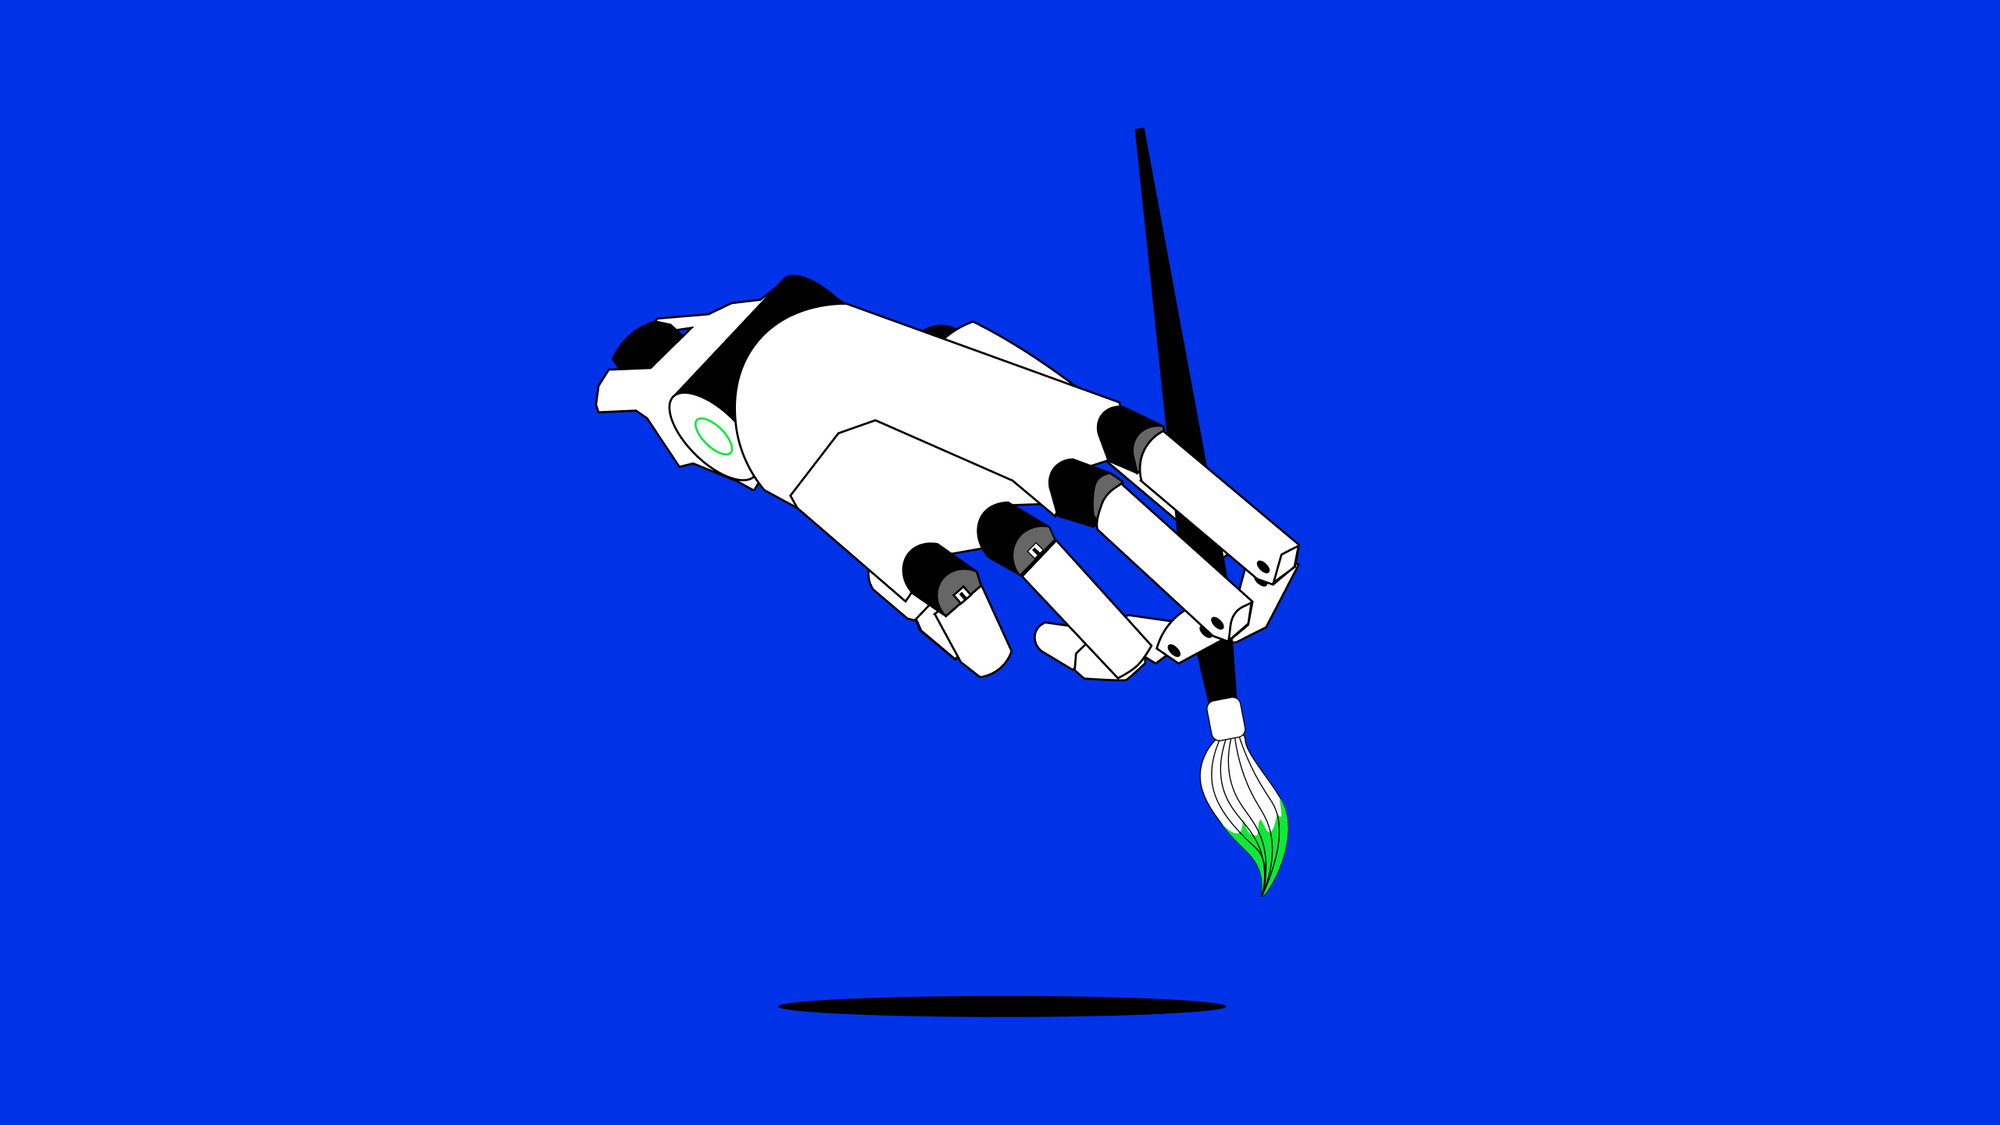 Digitally drawn illustration of a robotic hand holding a paint brush with green ink on the brush tip. Image has an electric blue background.